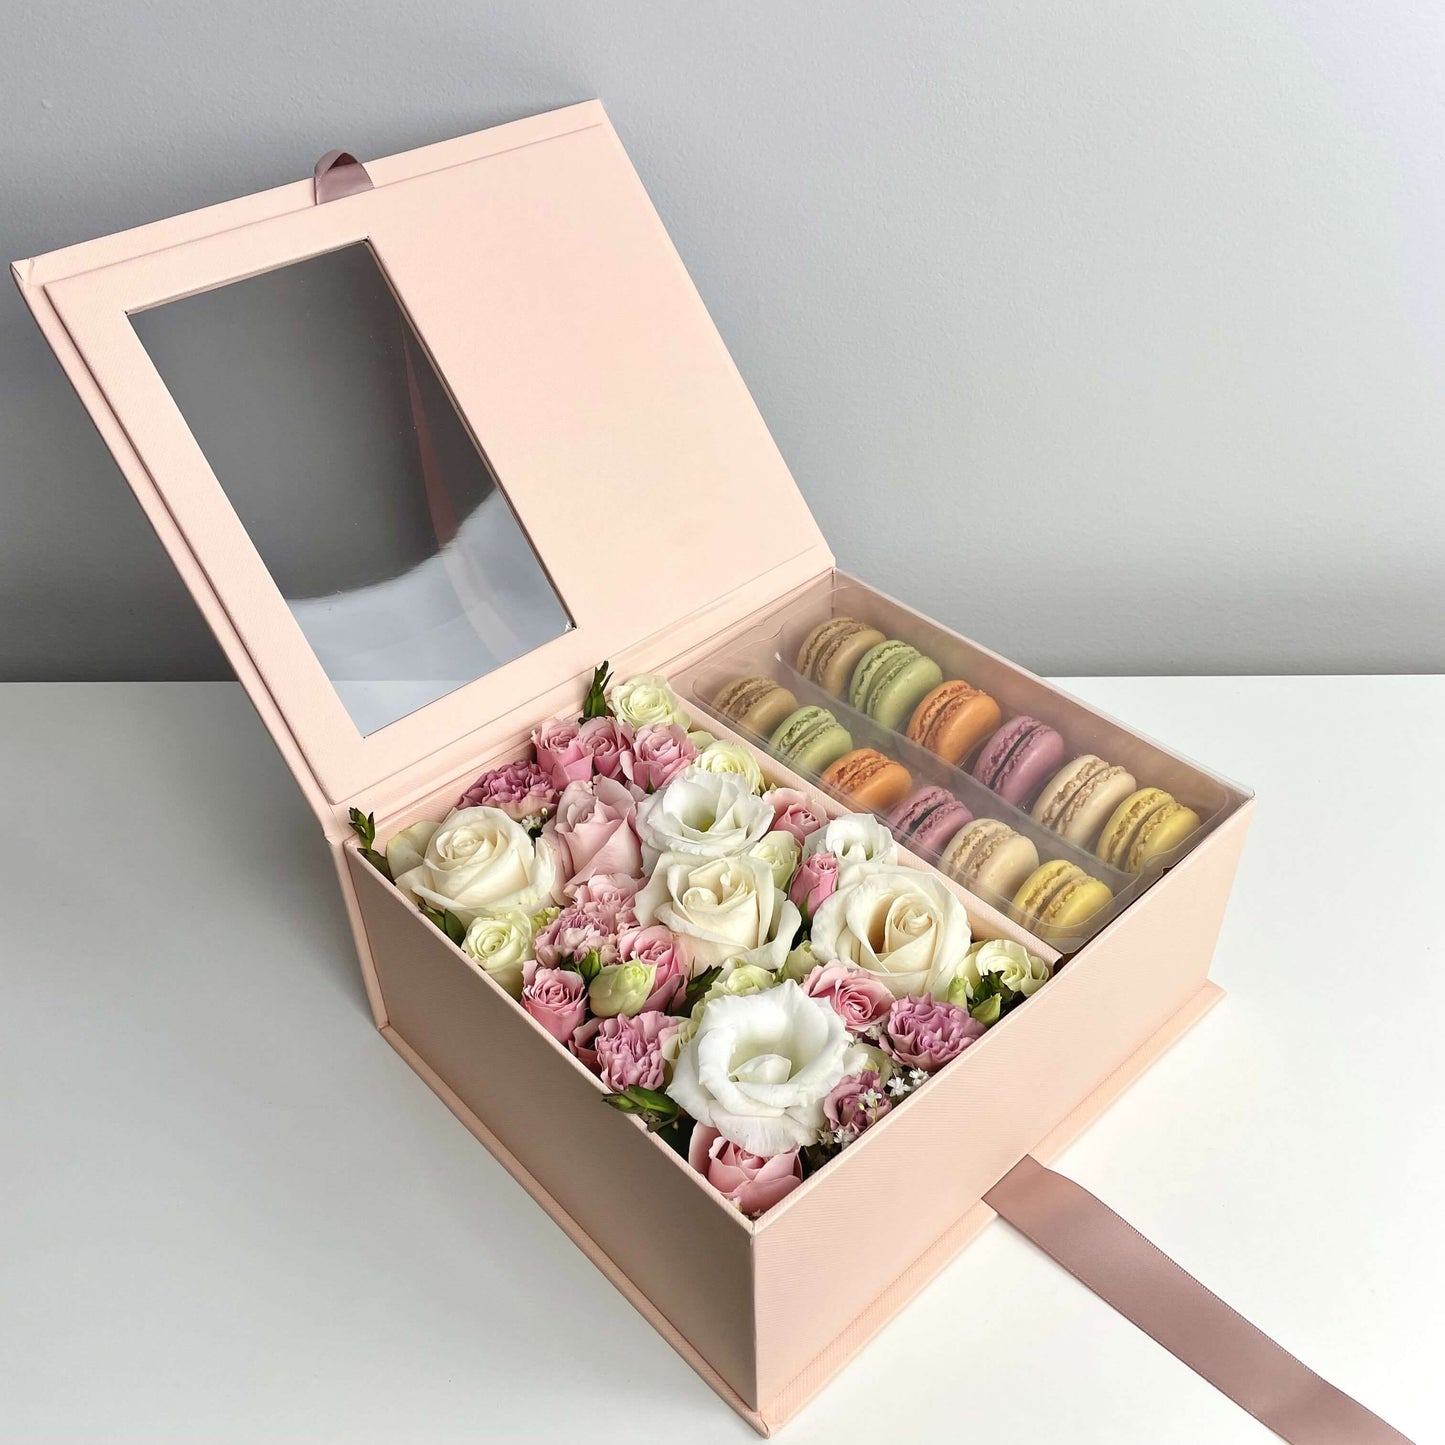 Pink flower box with macarons featuring white and pink roses